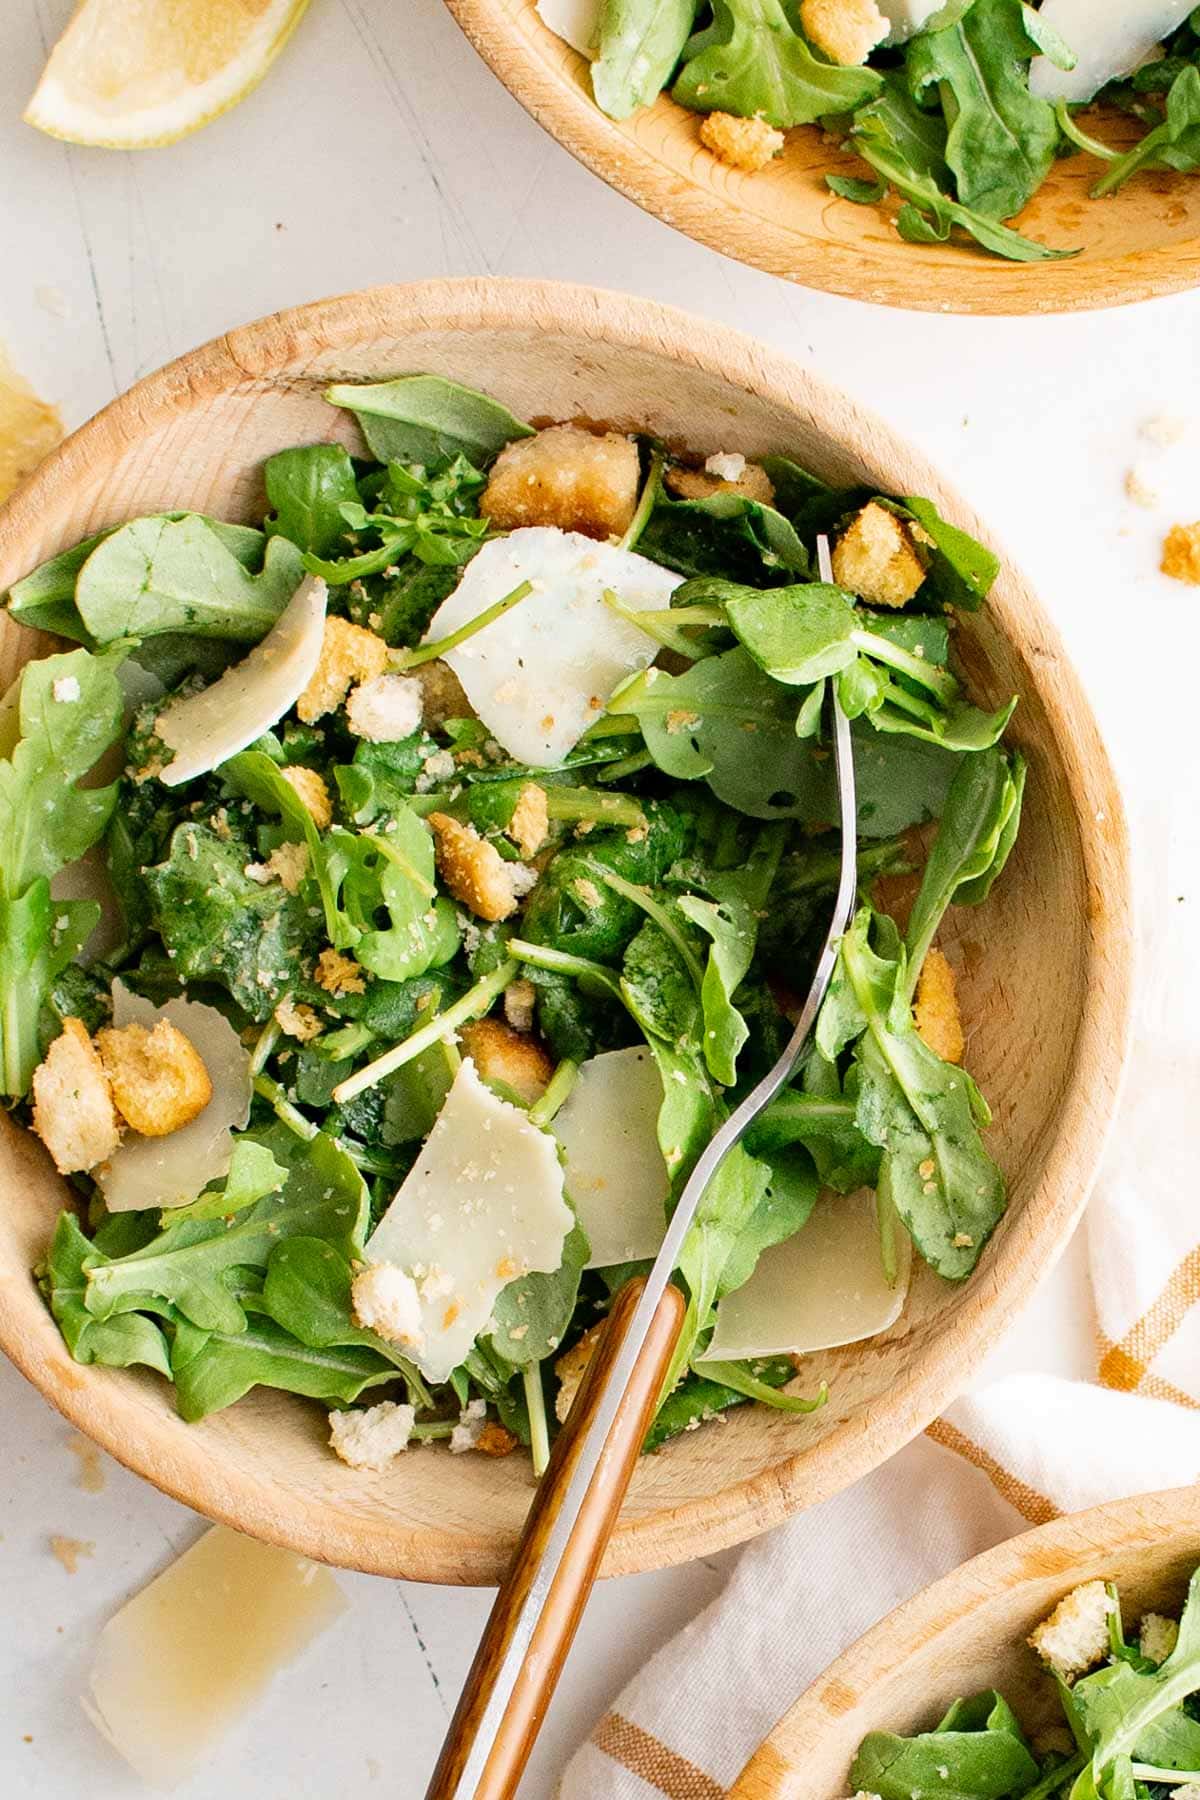 Arugula leaves, parmesan and croutons i a wooden bowl with salad tongs.